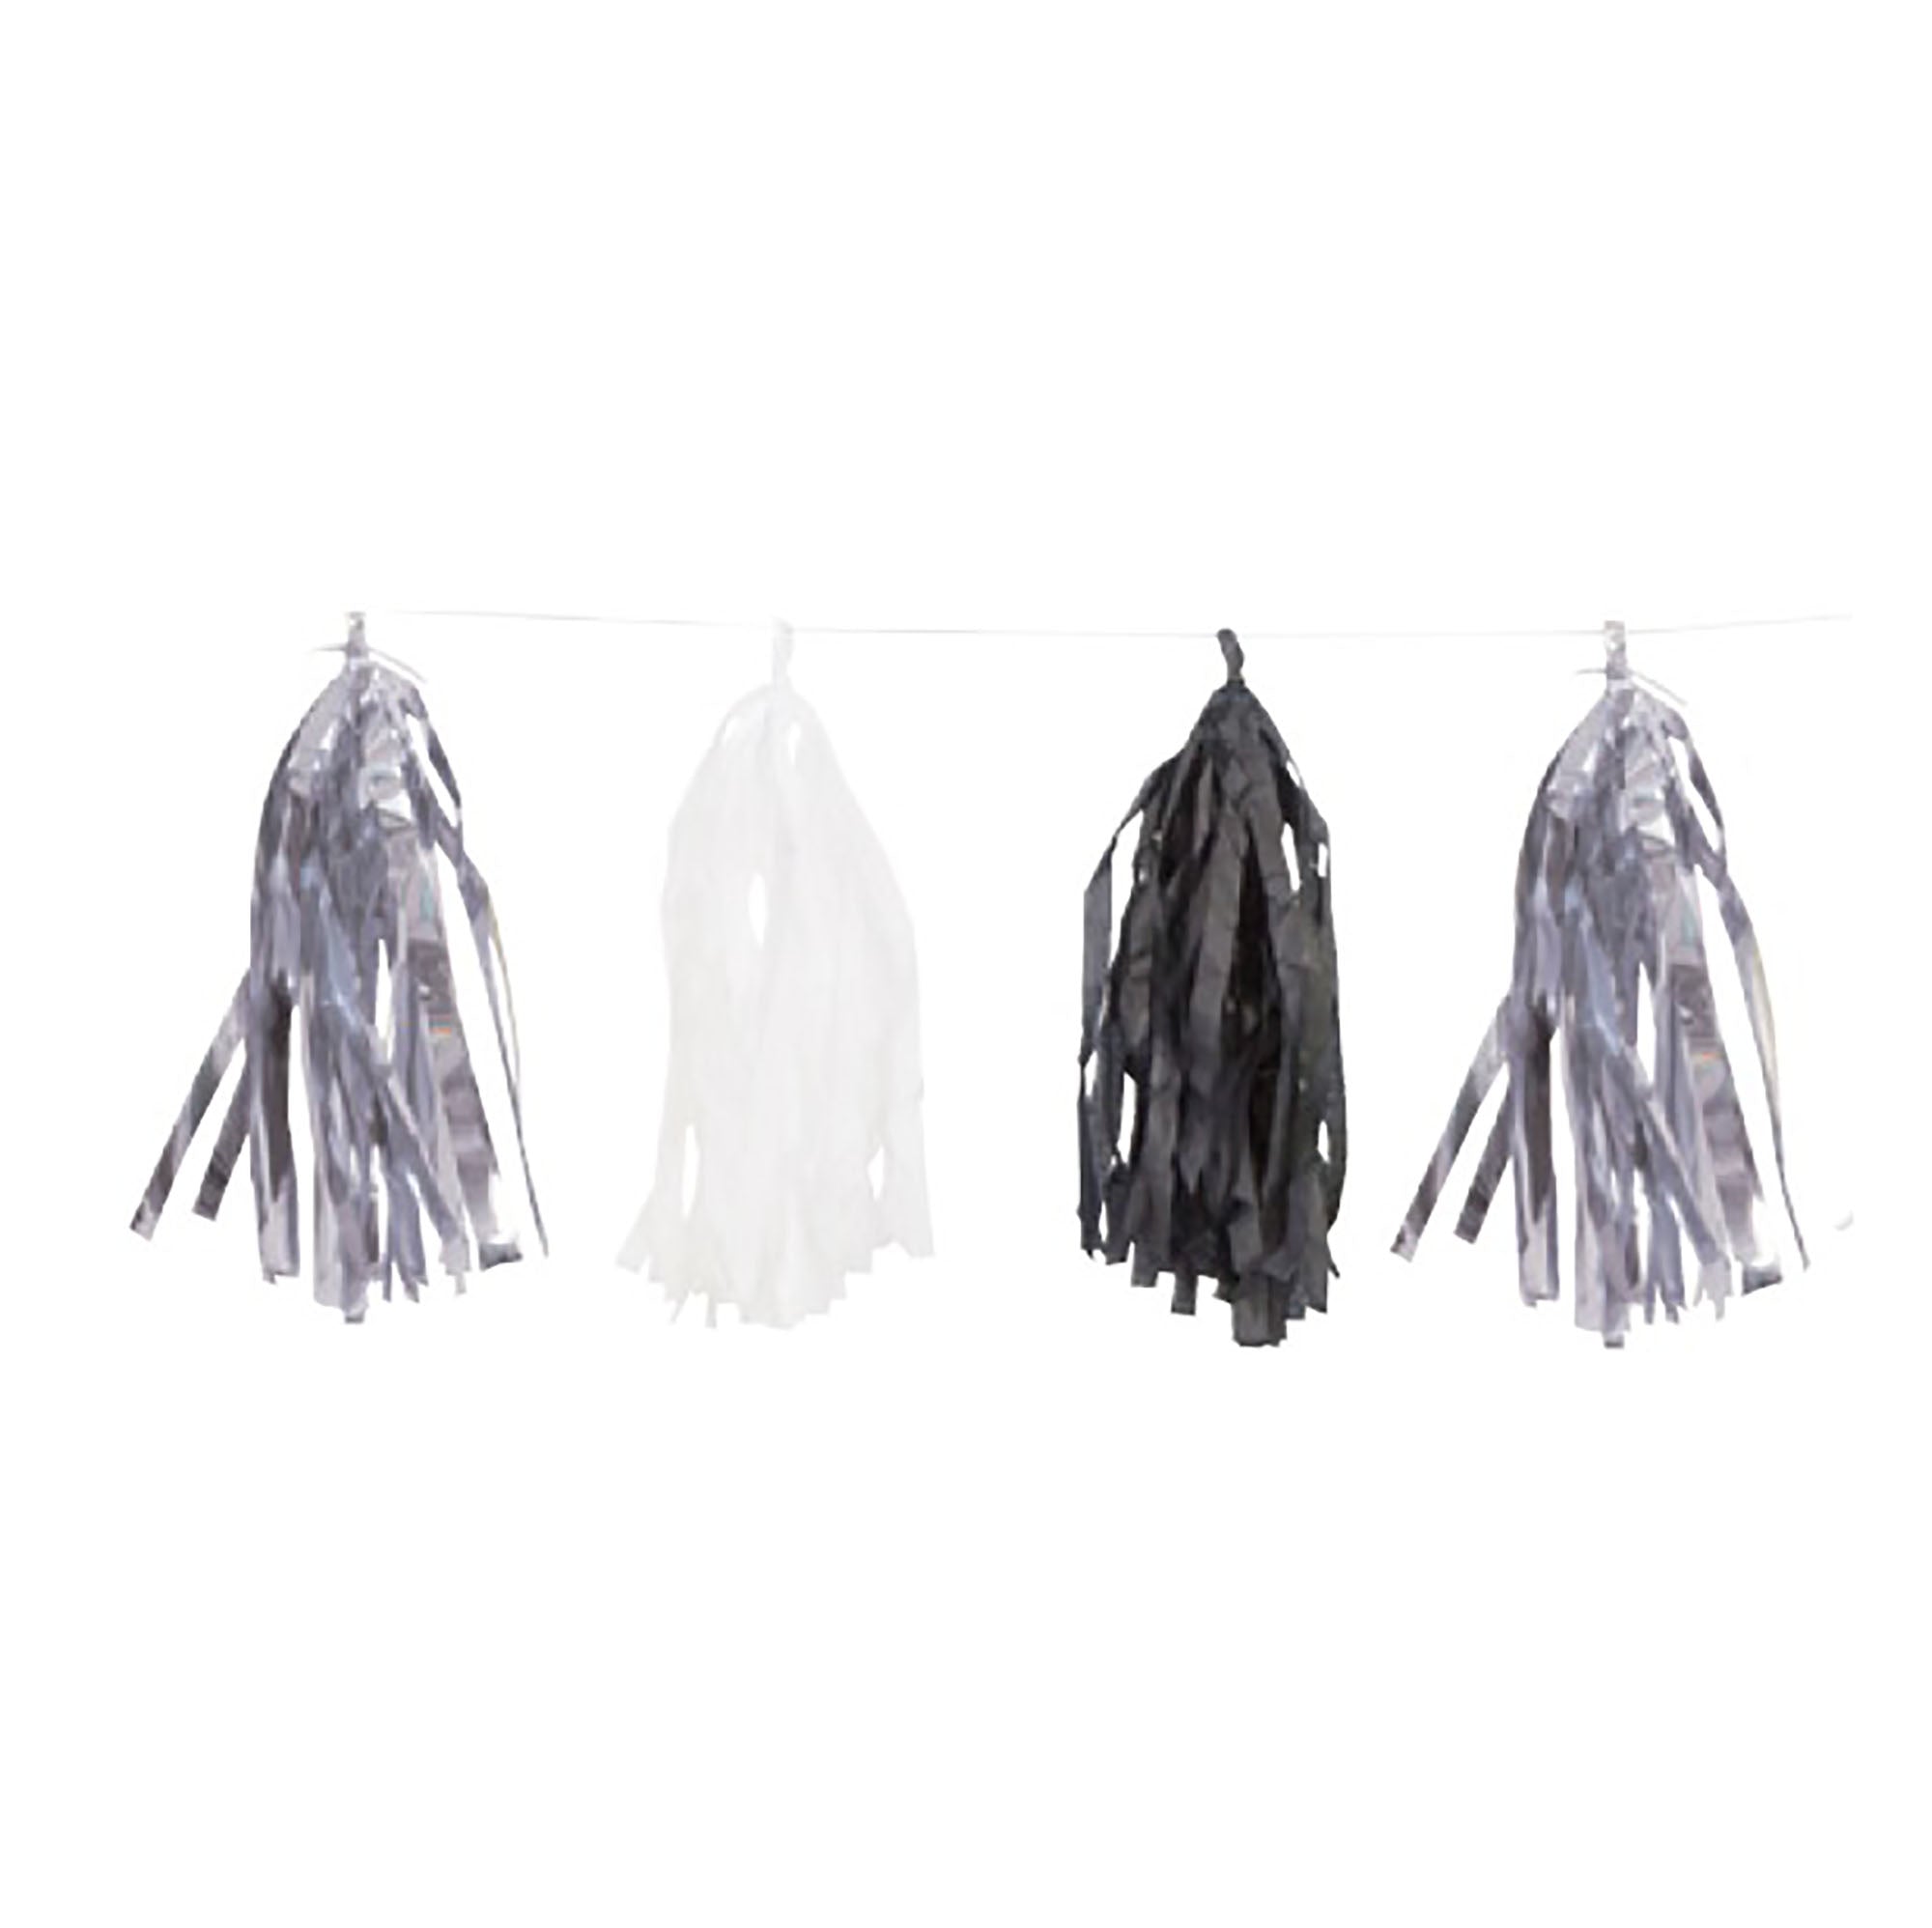 Foil Tassel Garland Black White and Silver 9ft Contains 15 Tassels